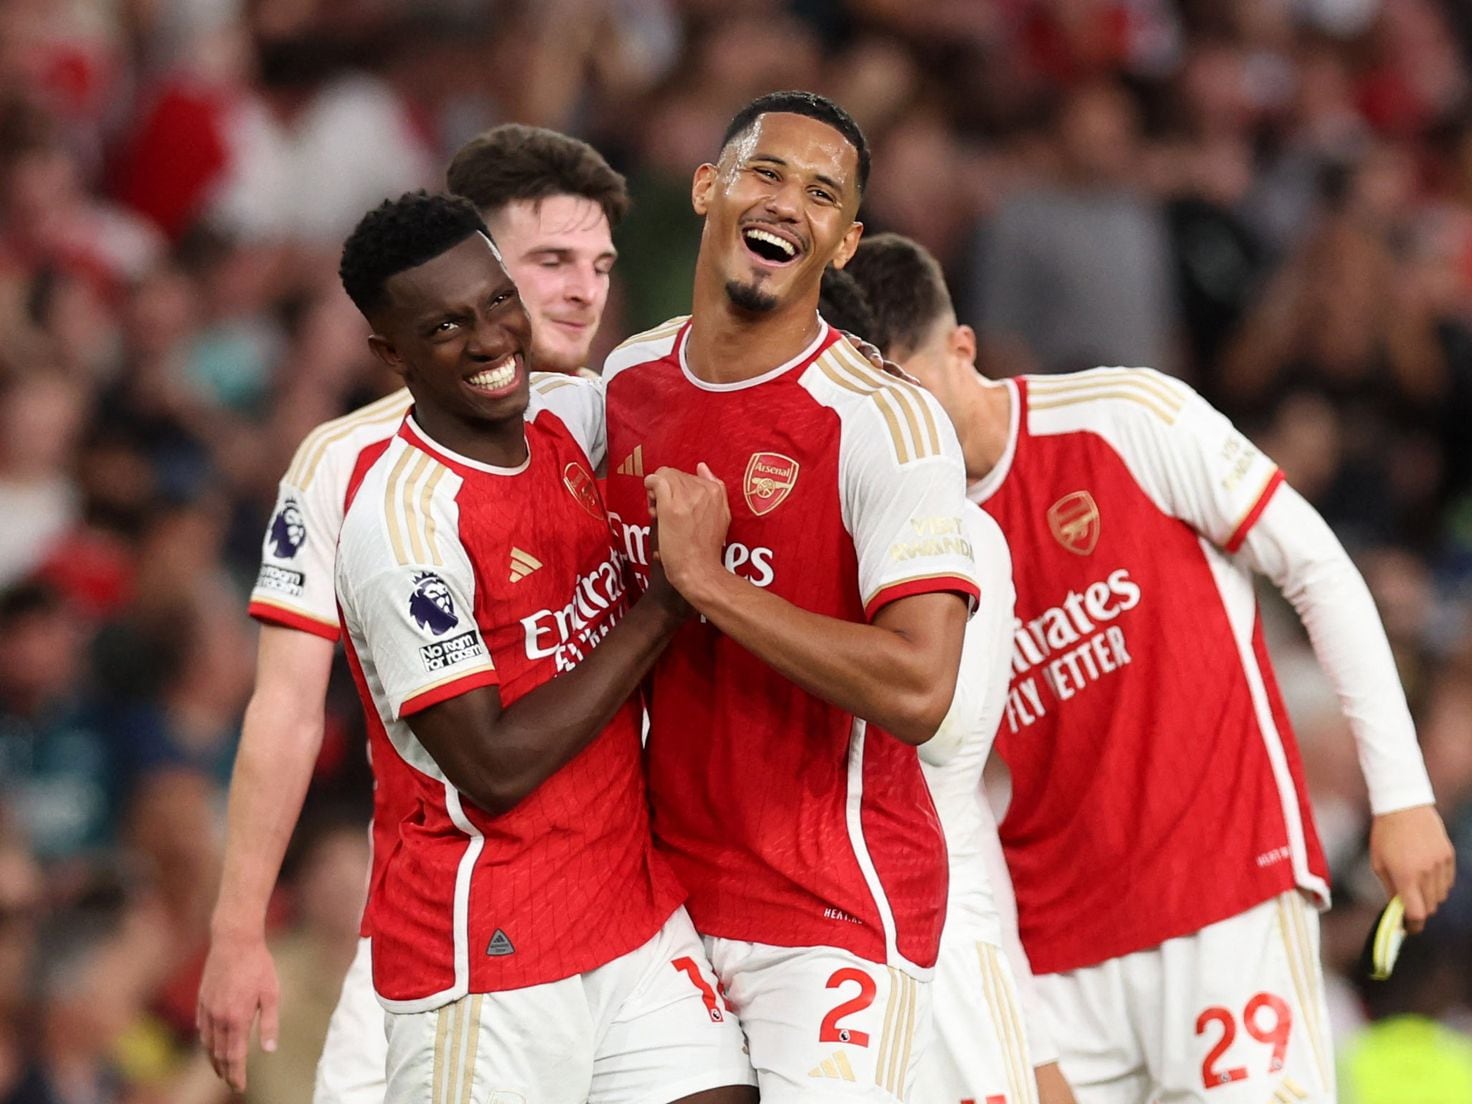 How to watch Arsenal v Sevilla - UEFA Champions League match on